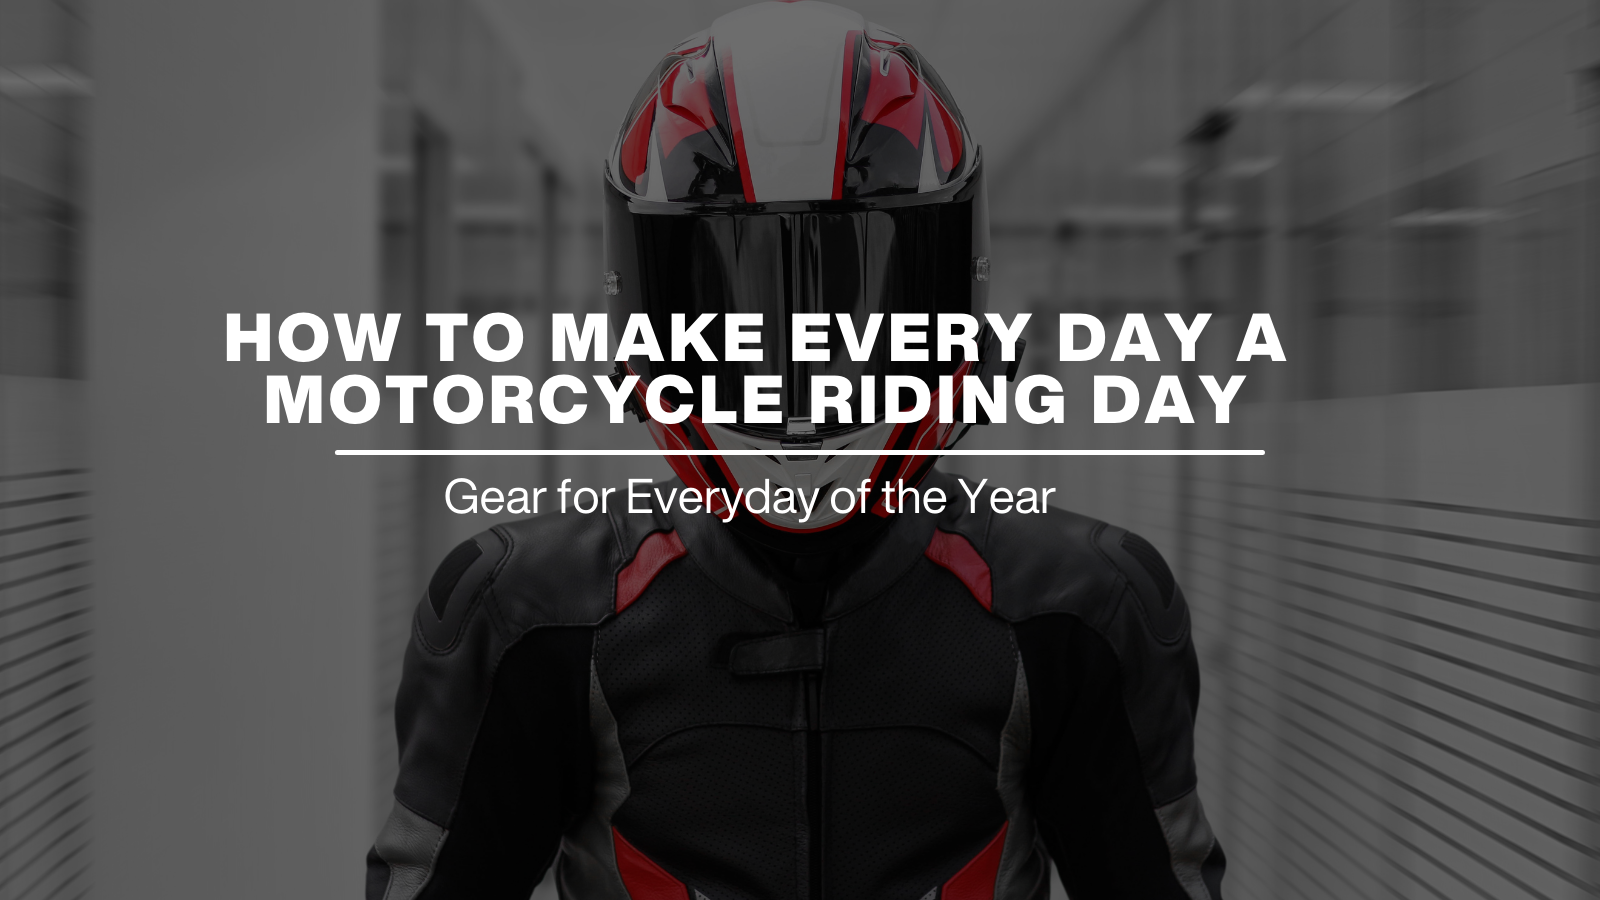 How to Make Every Day a Motorcycle Riding Day